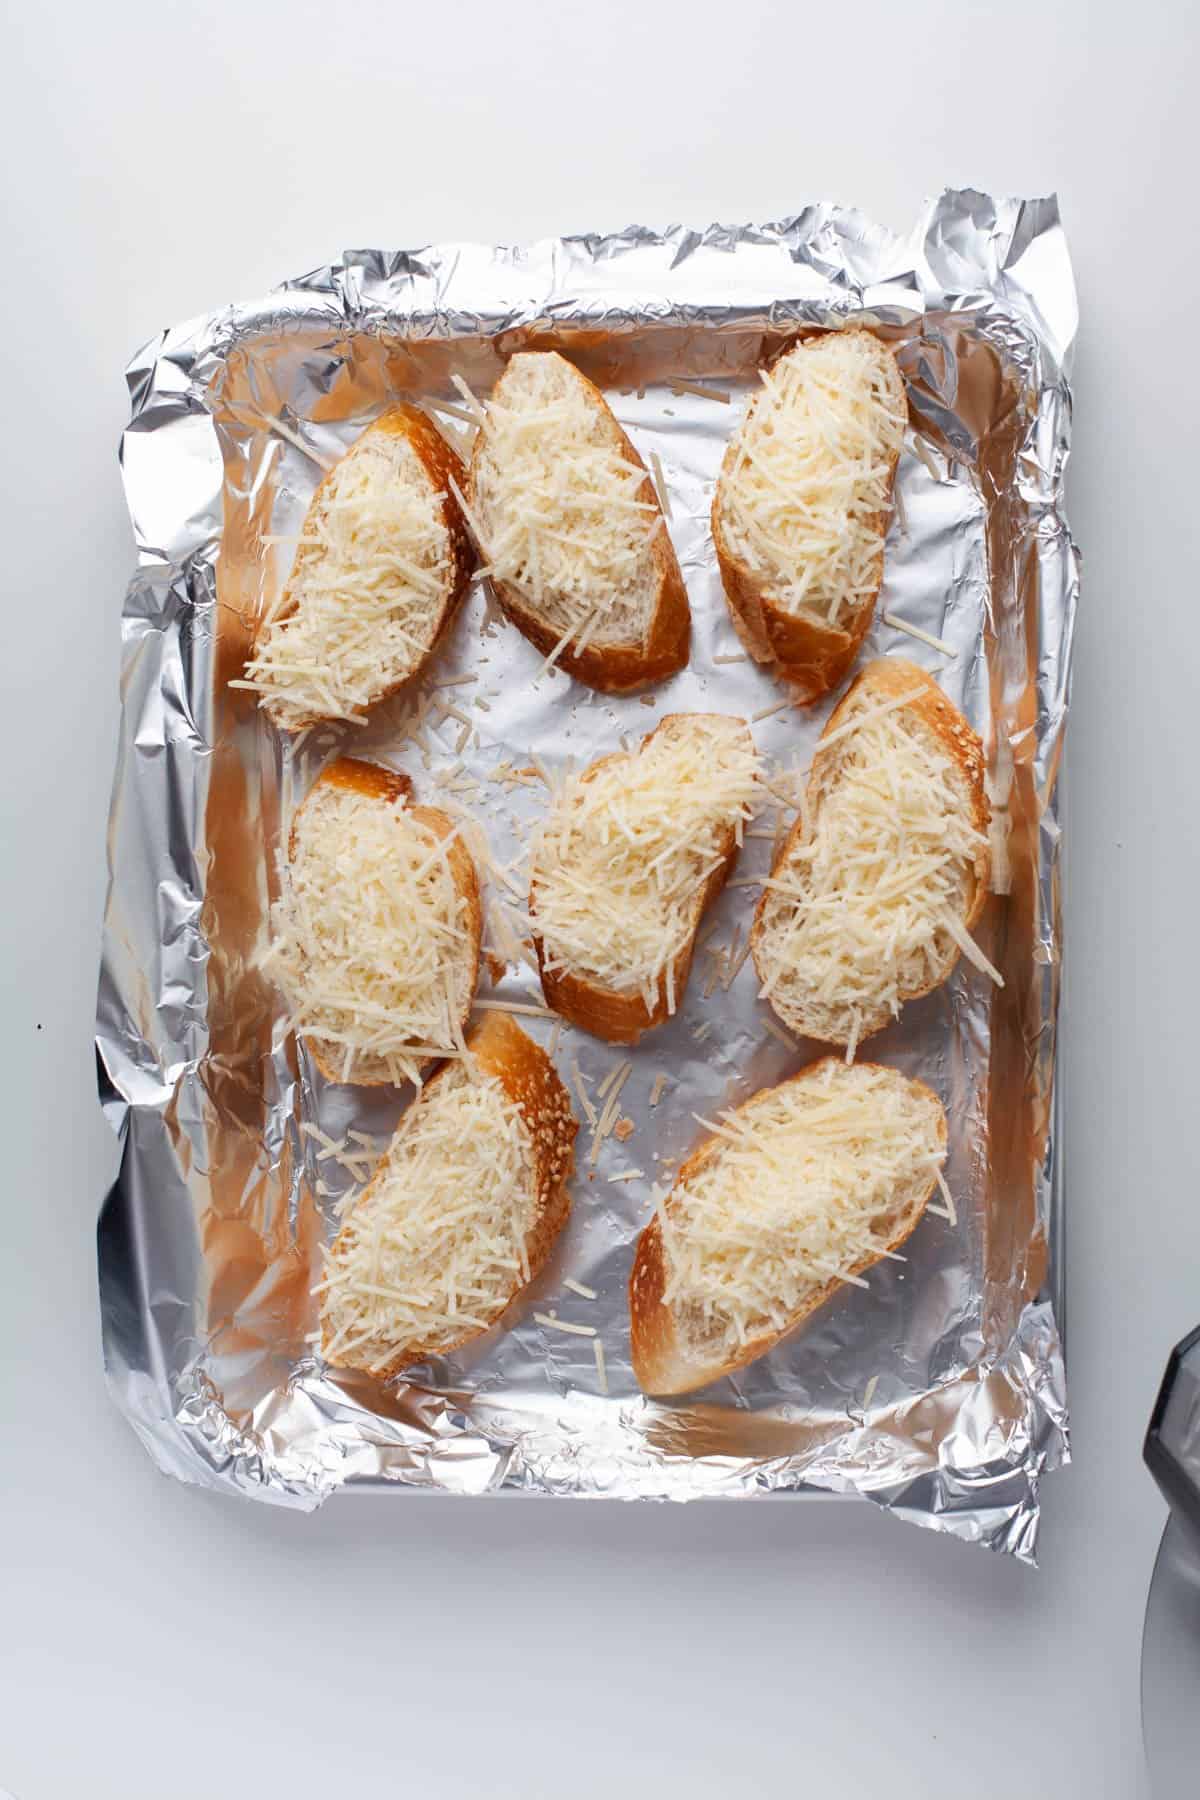 Cheese sprinkled on slices of toast on a baking sheet lined with foil